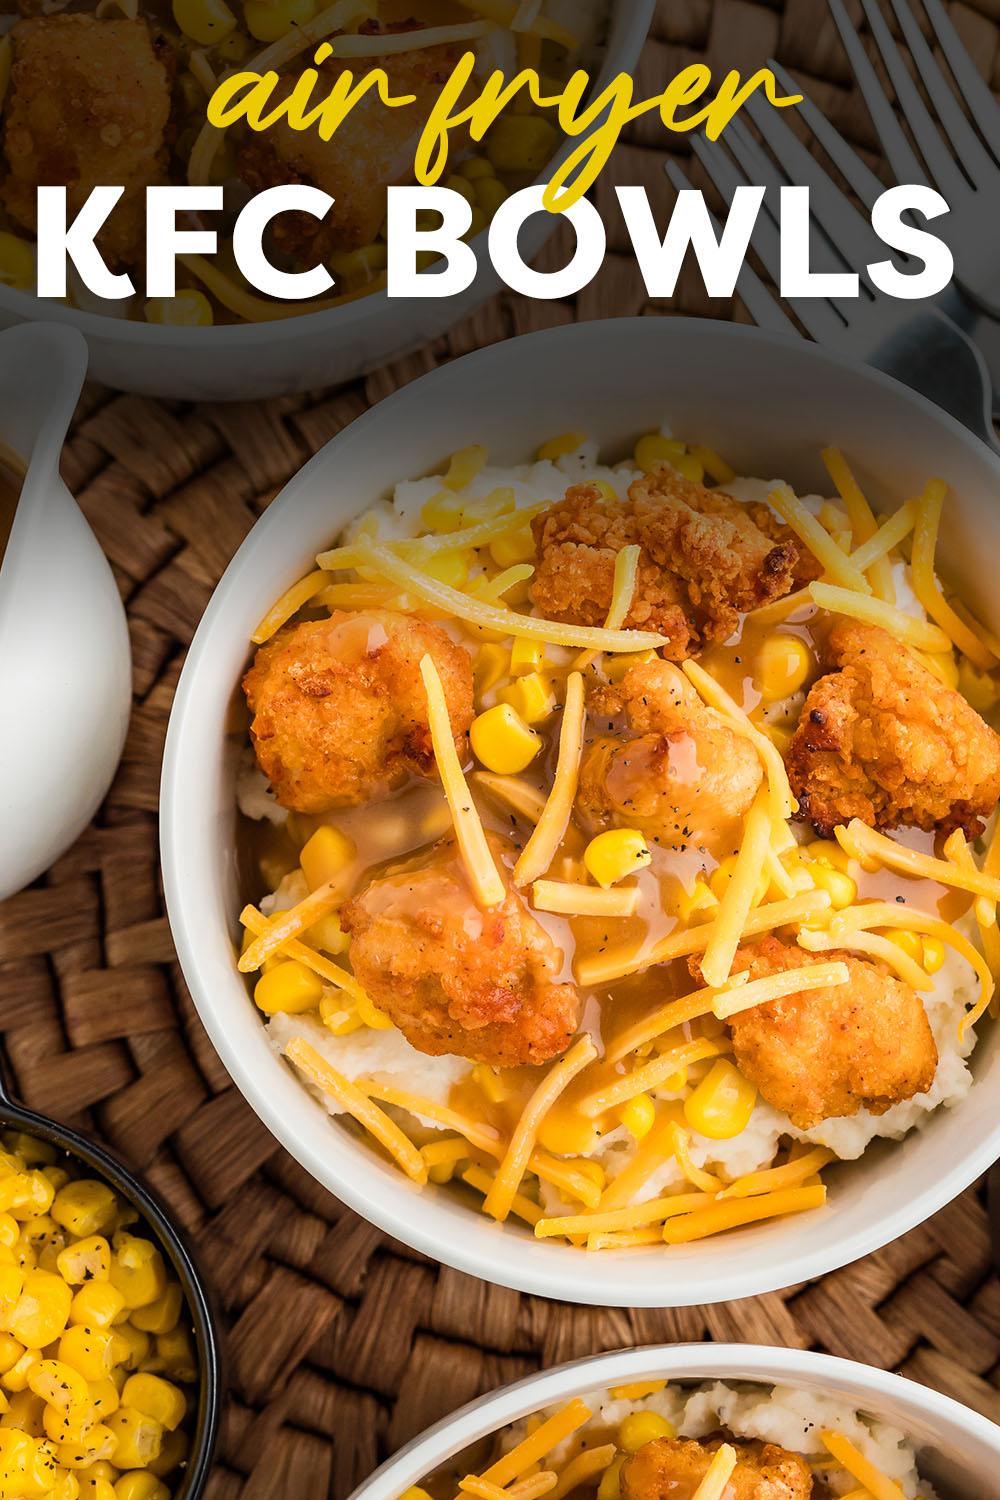 These crispy chicken bites mixed in with potatoes, cheese, and corn are super tasty!  This recipe is a copycat of the famous KFC bowls where we cook our chicken in the air fryer!